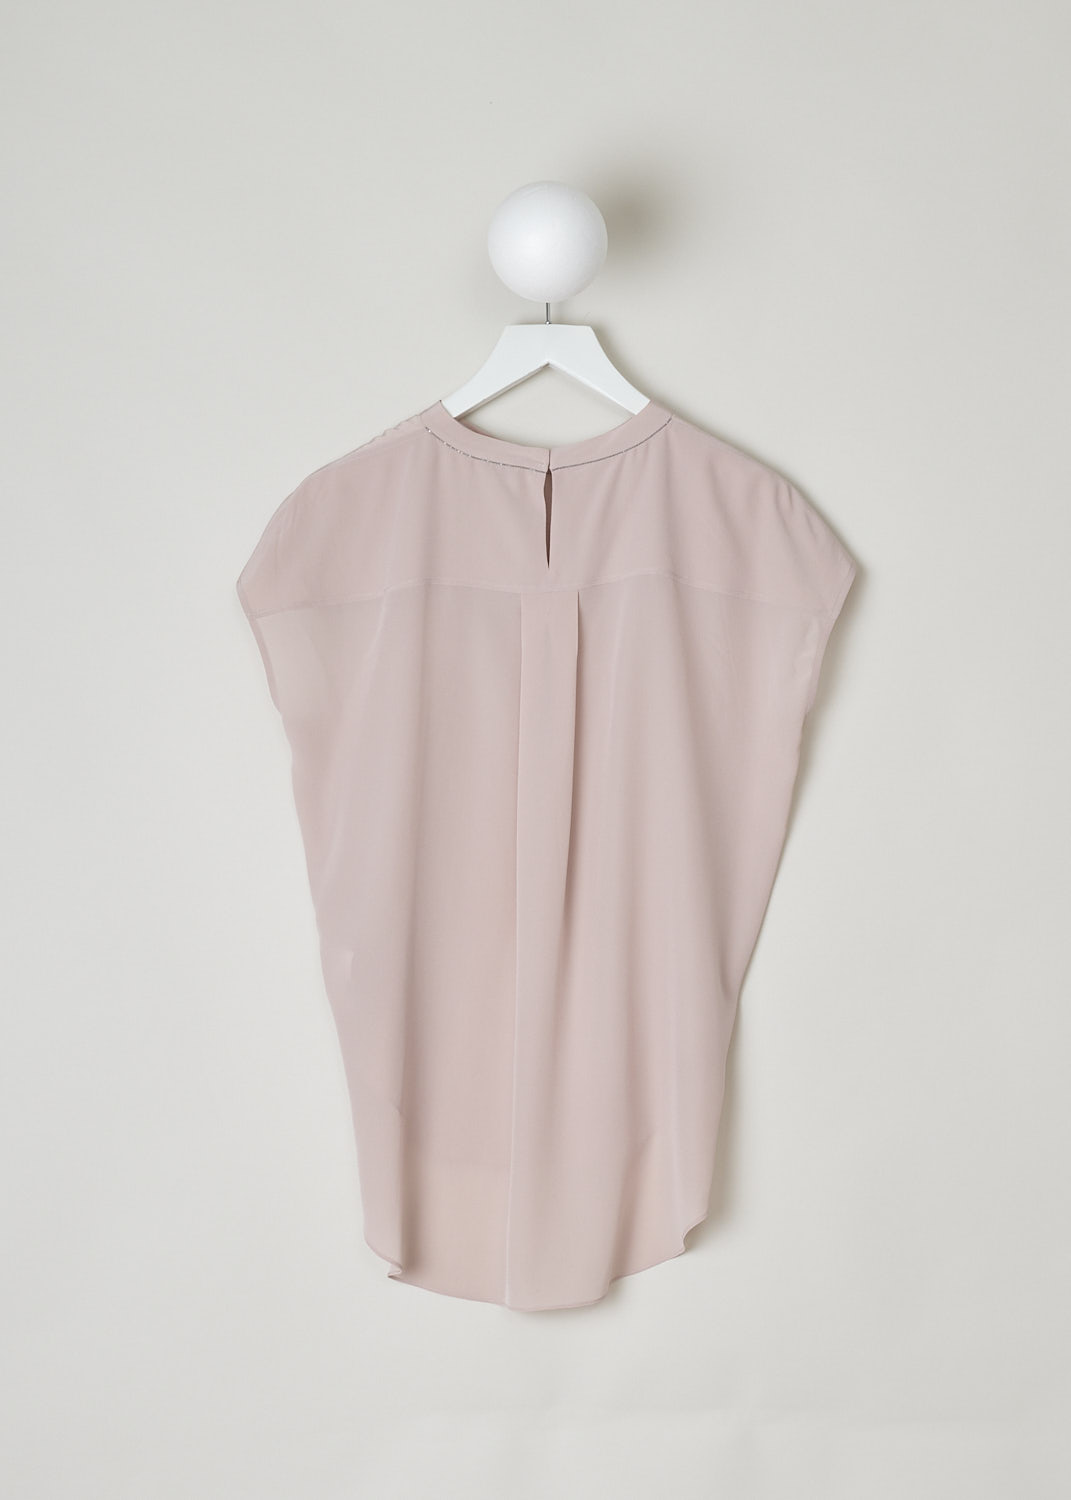 BRUNELLO CUCINELLI, BLUSH PINK SILK TOP, MB993EQ100_C8577, Pink, Back, This blush pink silk top has a rounded neckline and subtle cap sleeves. A paneled look is created by the two seams running vertically in the front. The top has a rounded hemline with a asymmetrical finish, meaning the back is longer than the front. In the back, a single button in the neck functions as the closure option, with a row of Monili beads decorating the seam. Also in the back, a single box pleat can be found.
